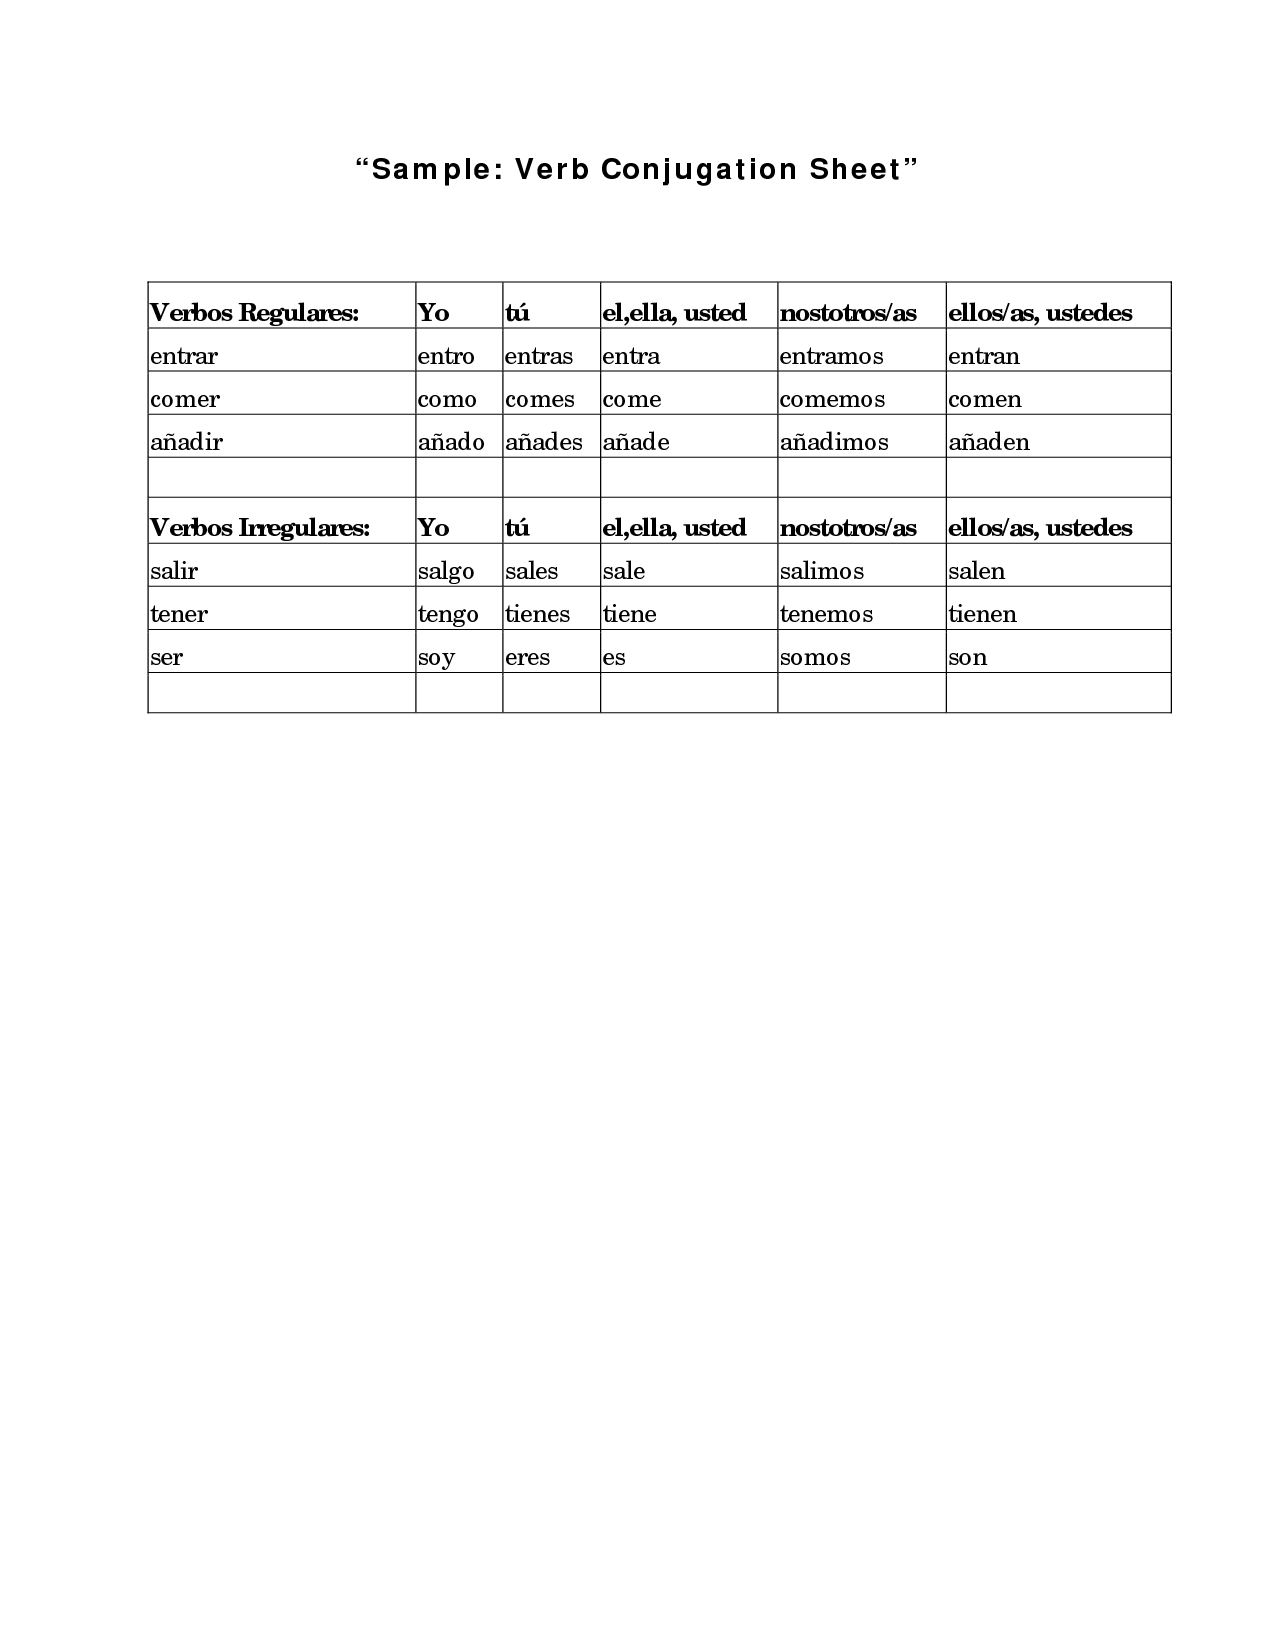 5-best-images-of-blank-spanish-verb-conjugation-worksheets-blank-spanish-verb-conjugation